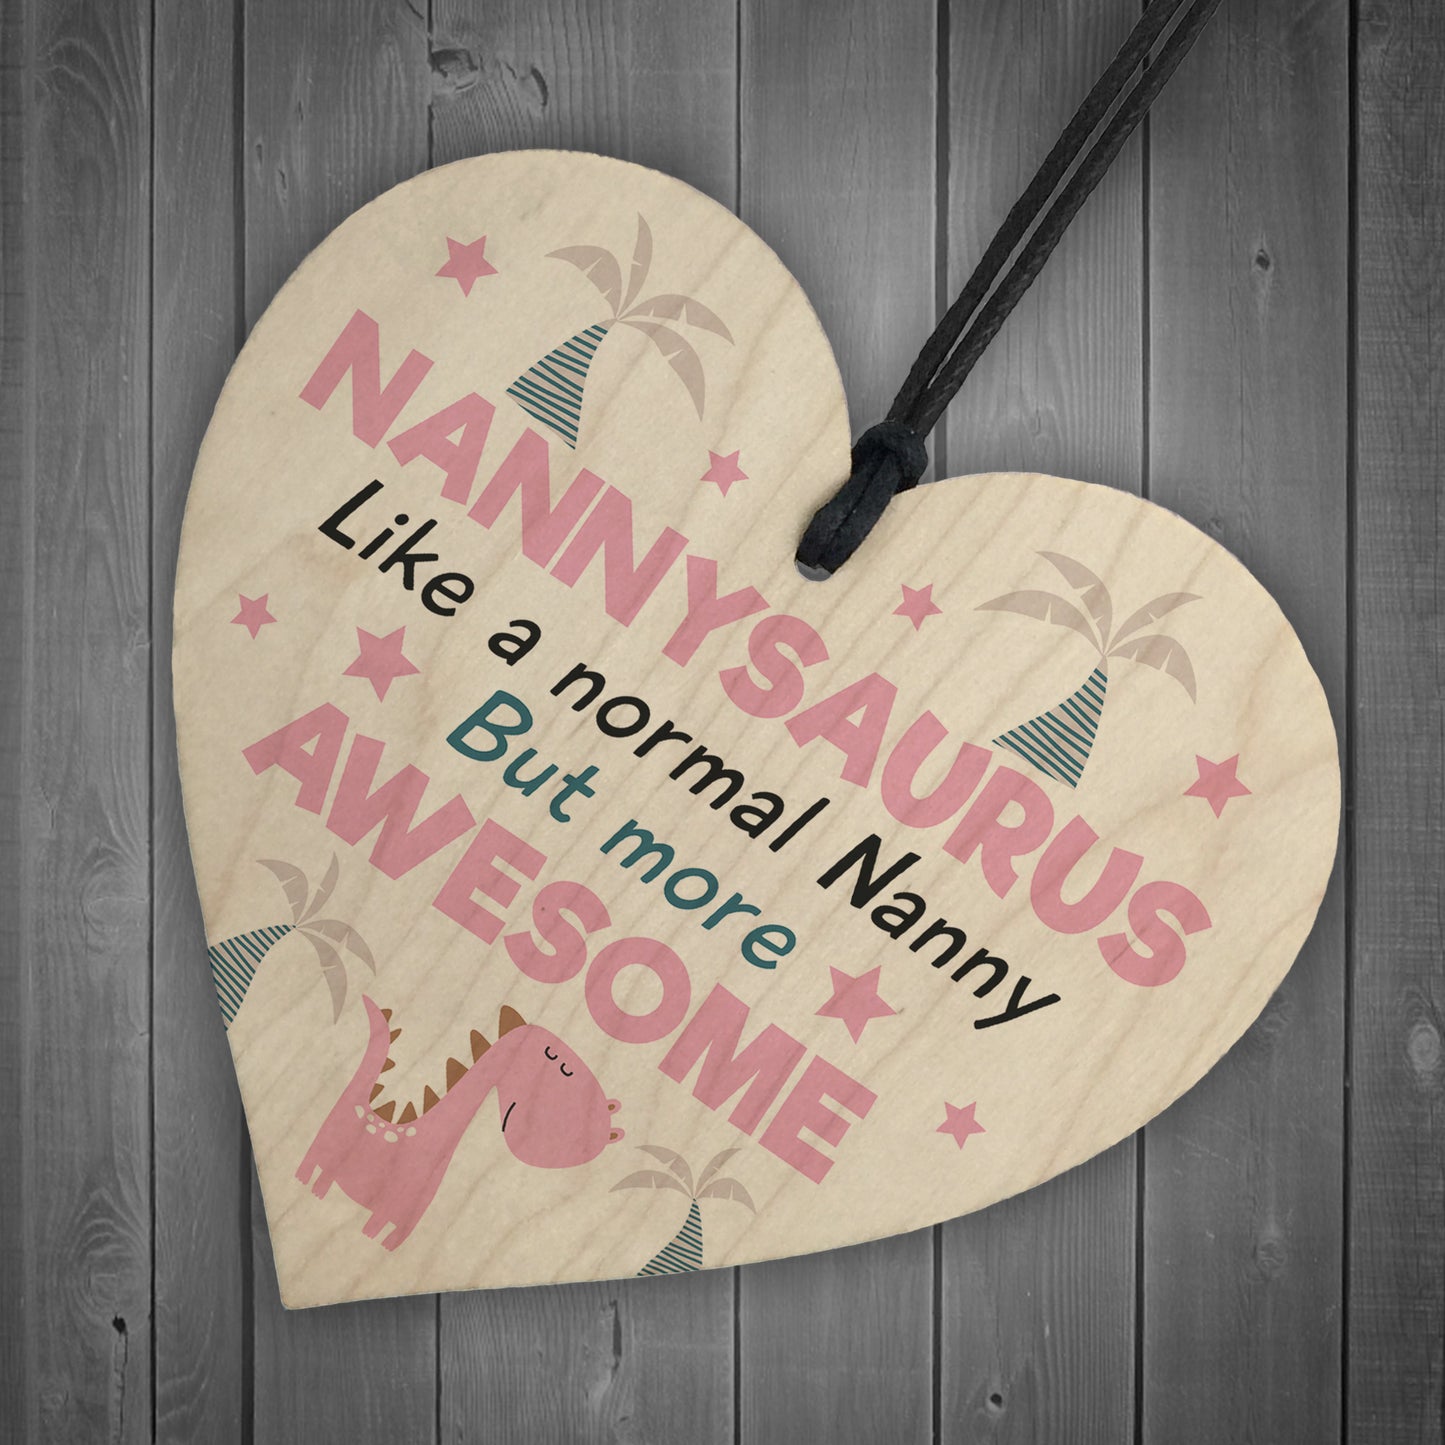 Gift For Nanny For Mothers Day Nannysaurus Birthday Gift